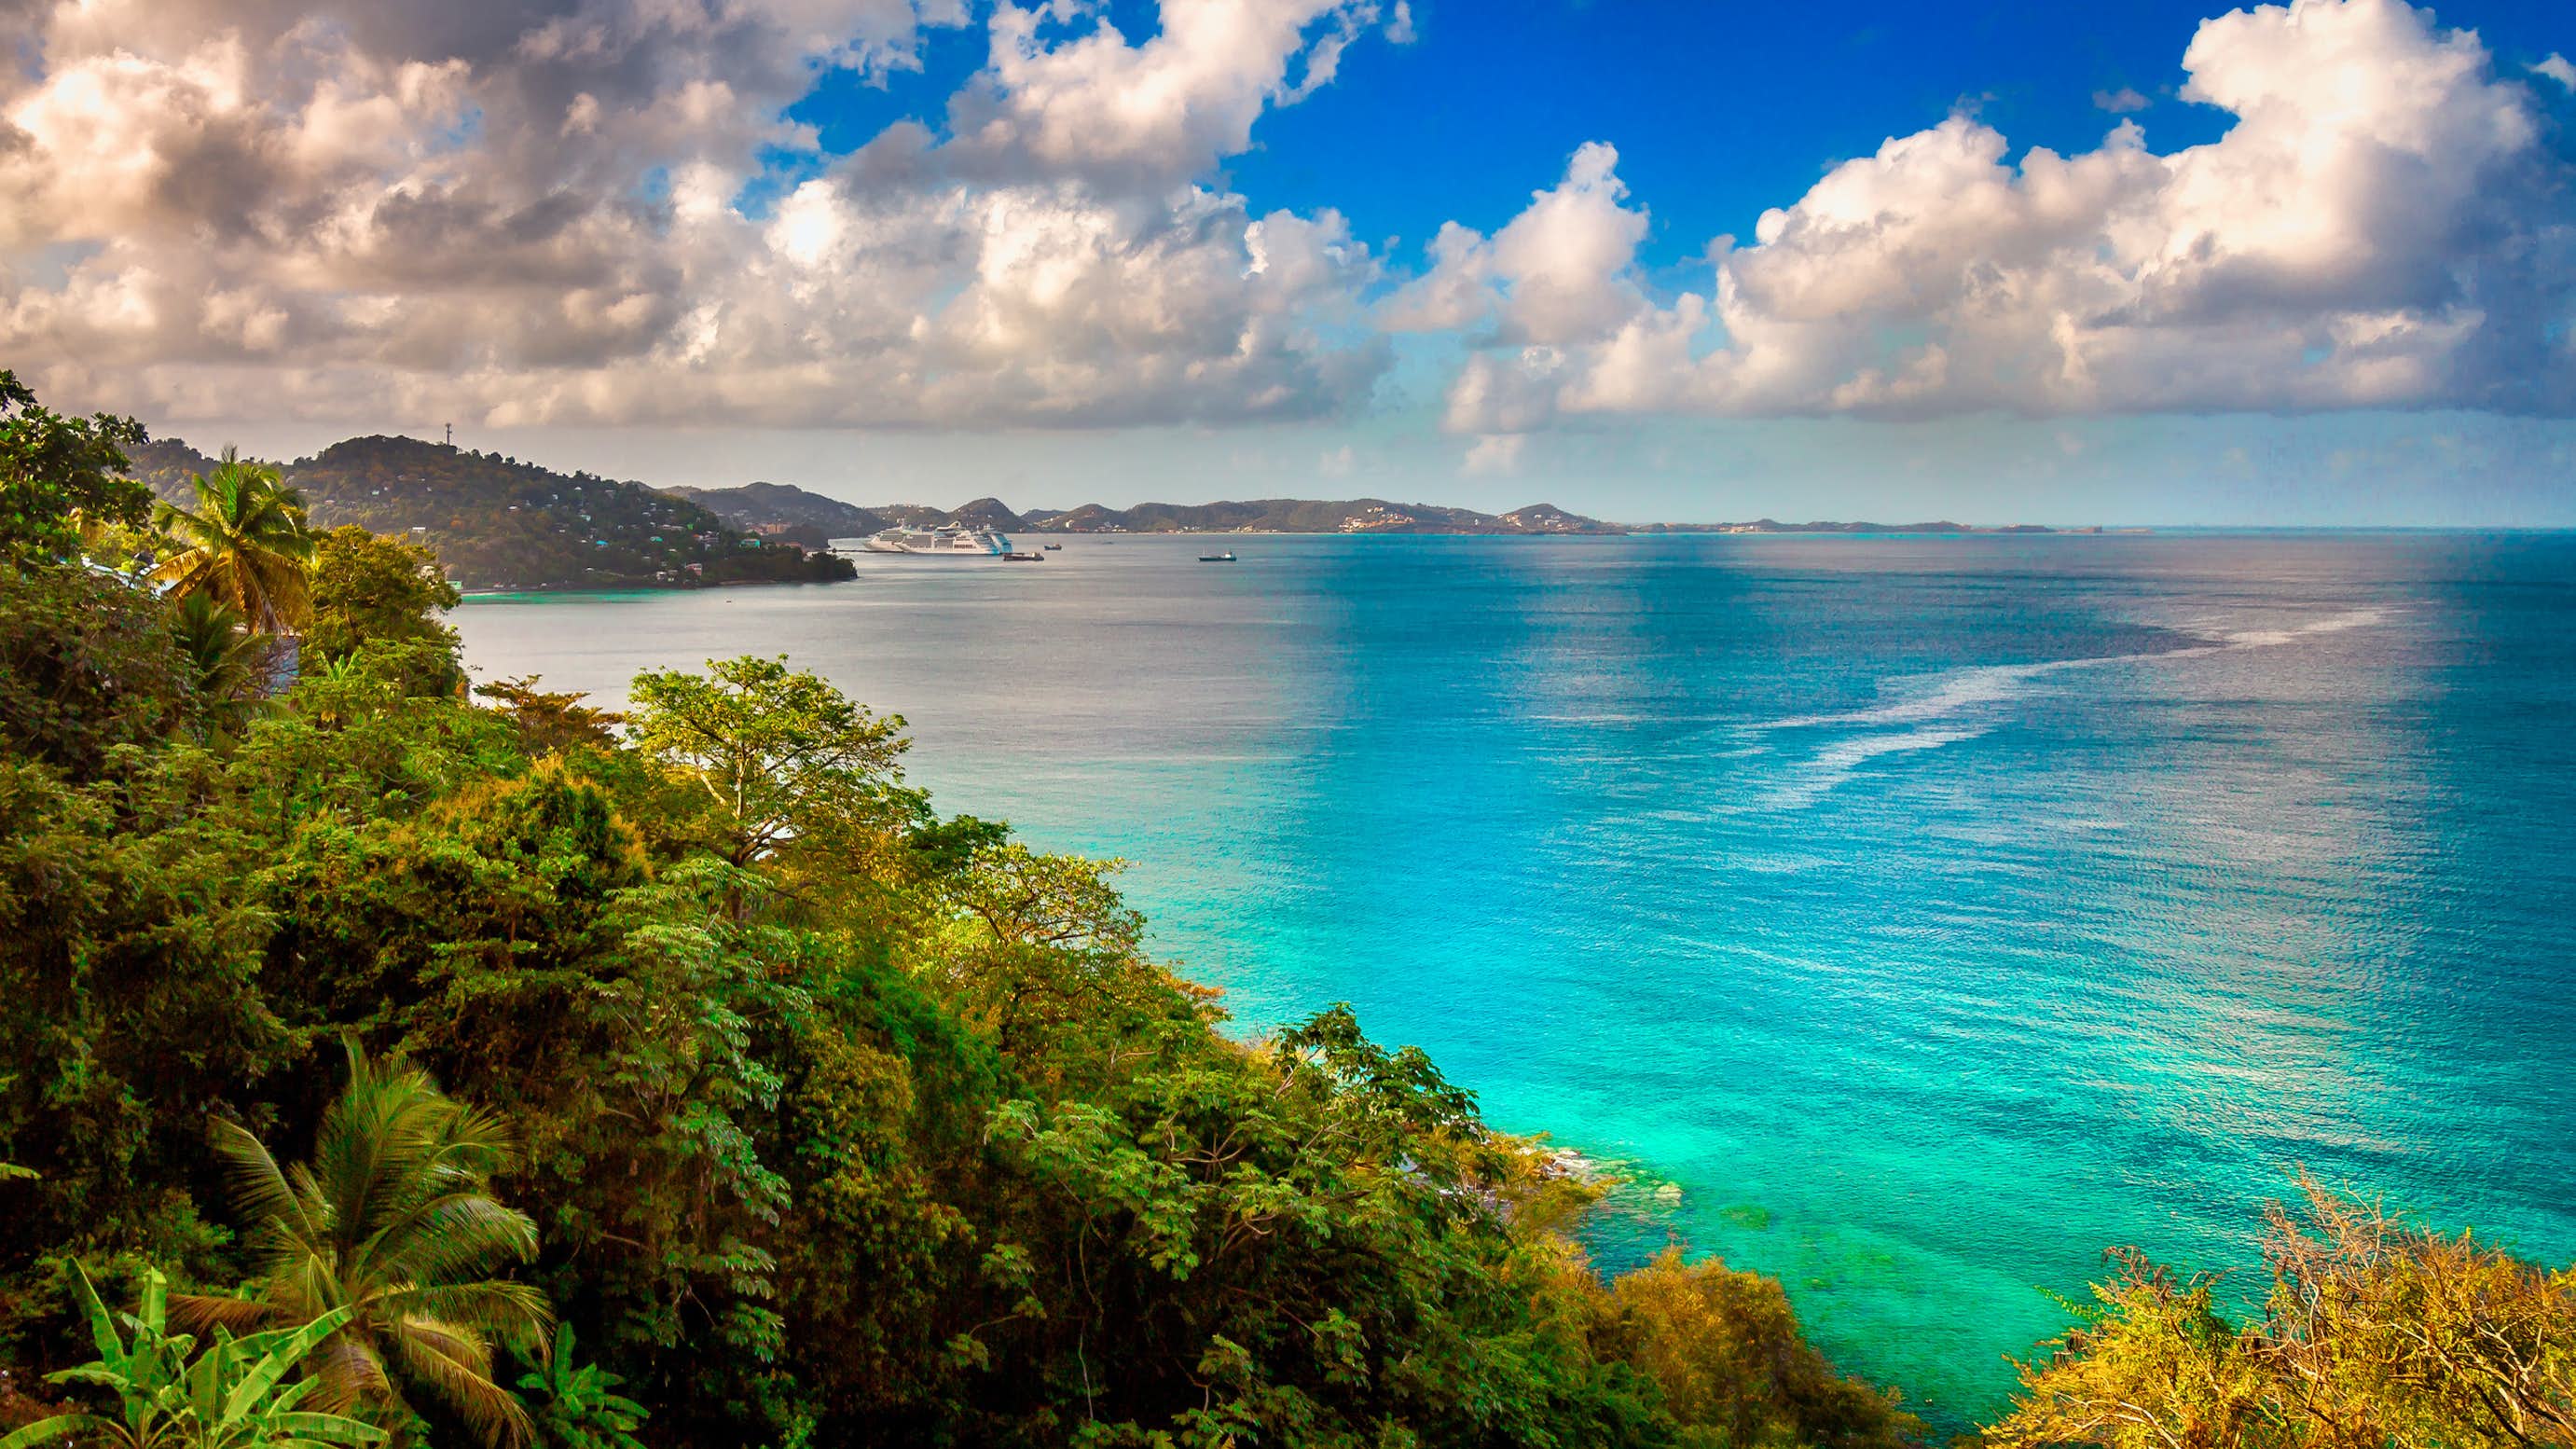 A breathtaking view from a hill in the Caribbean Windward Islands, featuring lush greenery and, in the distance, the vast expanse of the deep blue sea—a perfect moment on your Yacht Charter Itinerary.